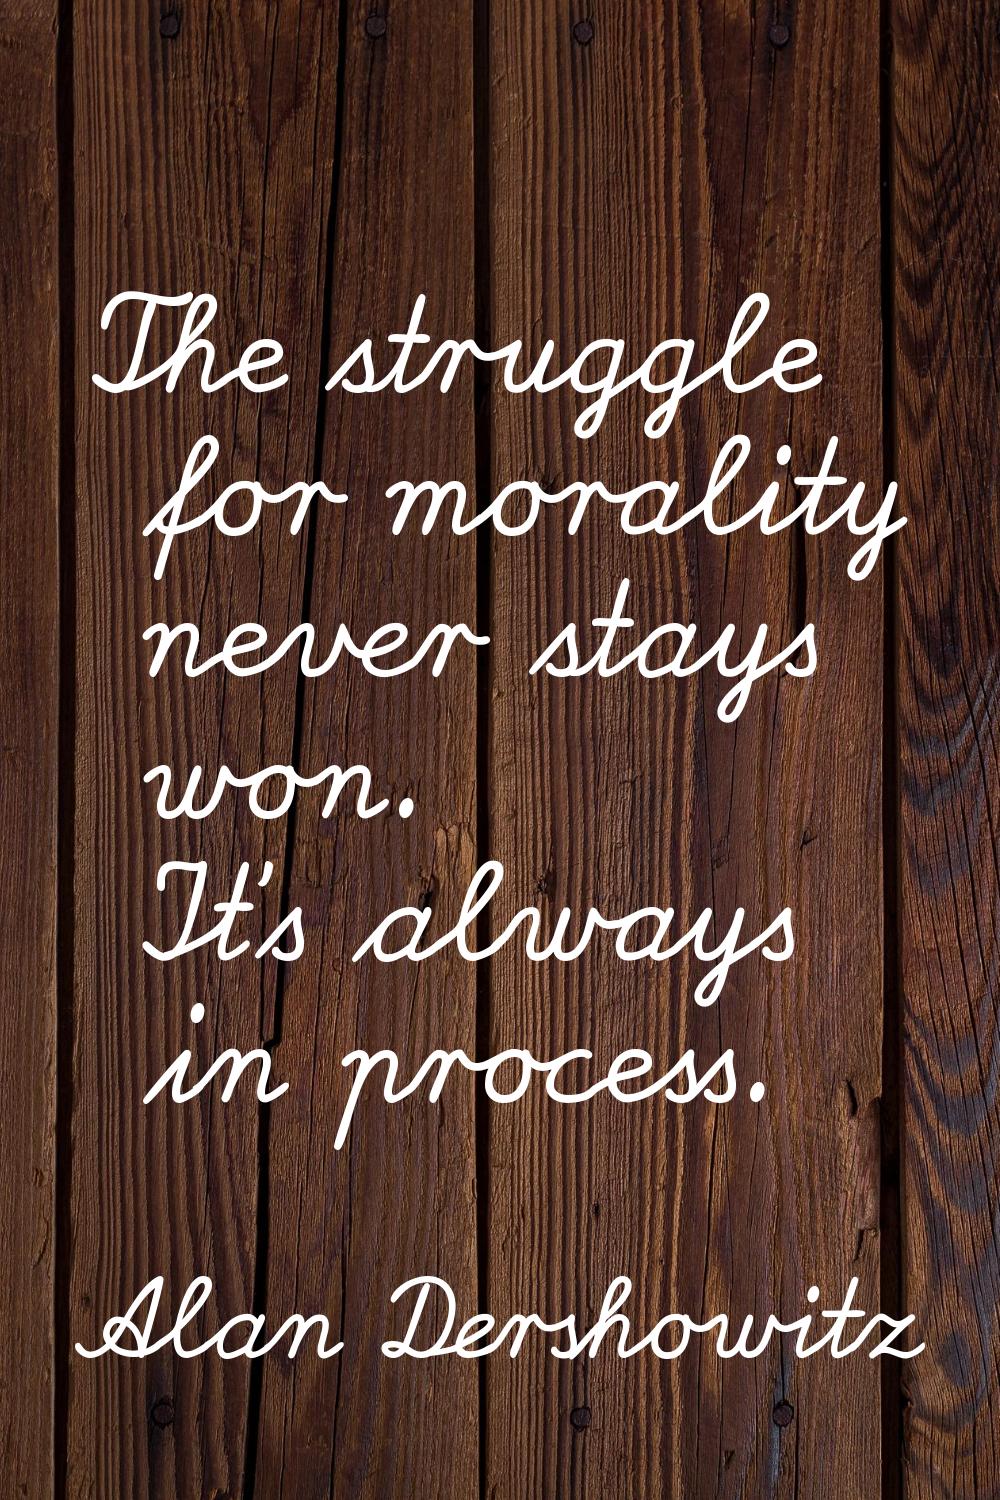 The struggle for morality never stays won. It's always in process.